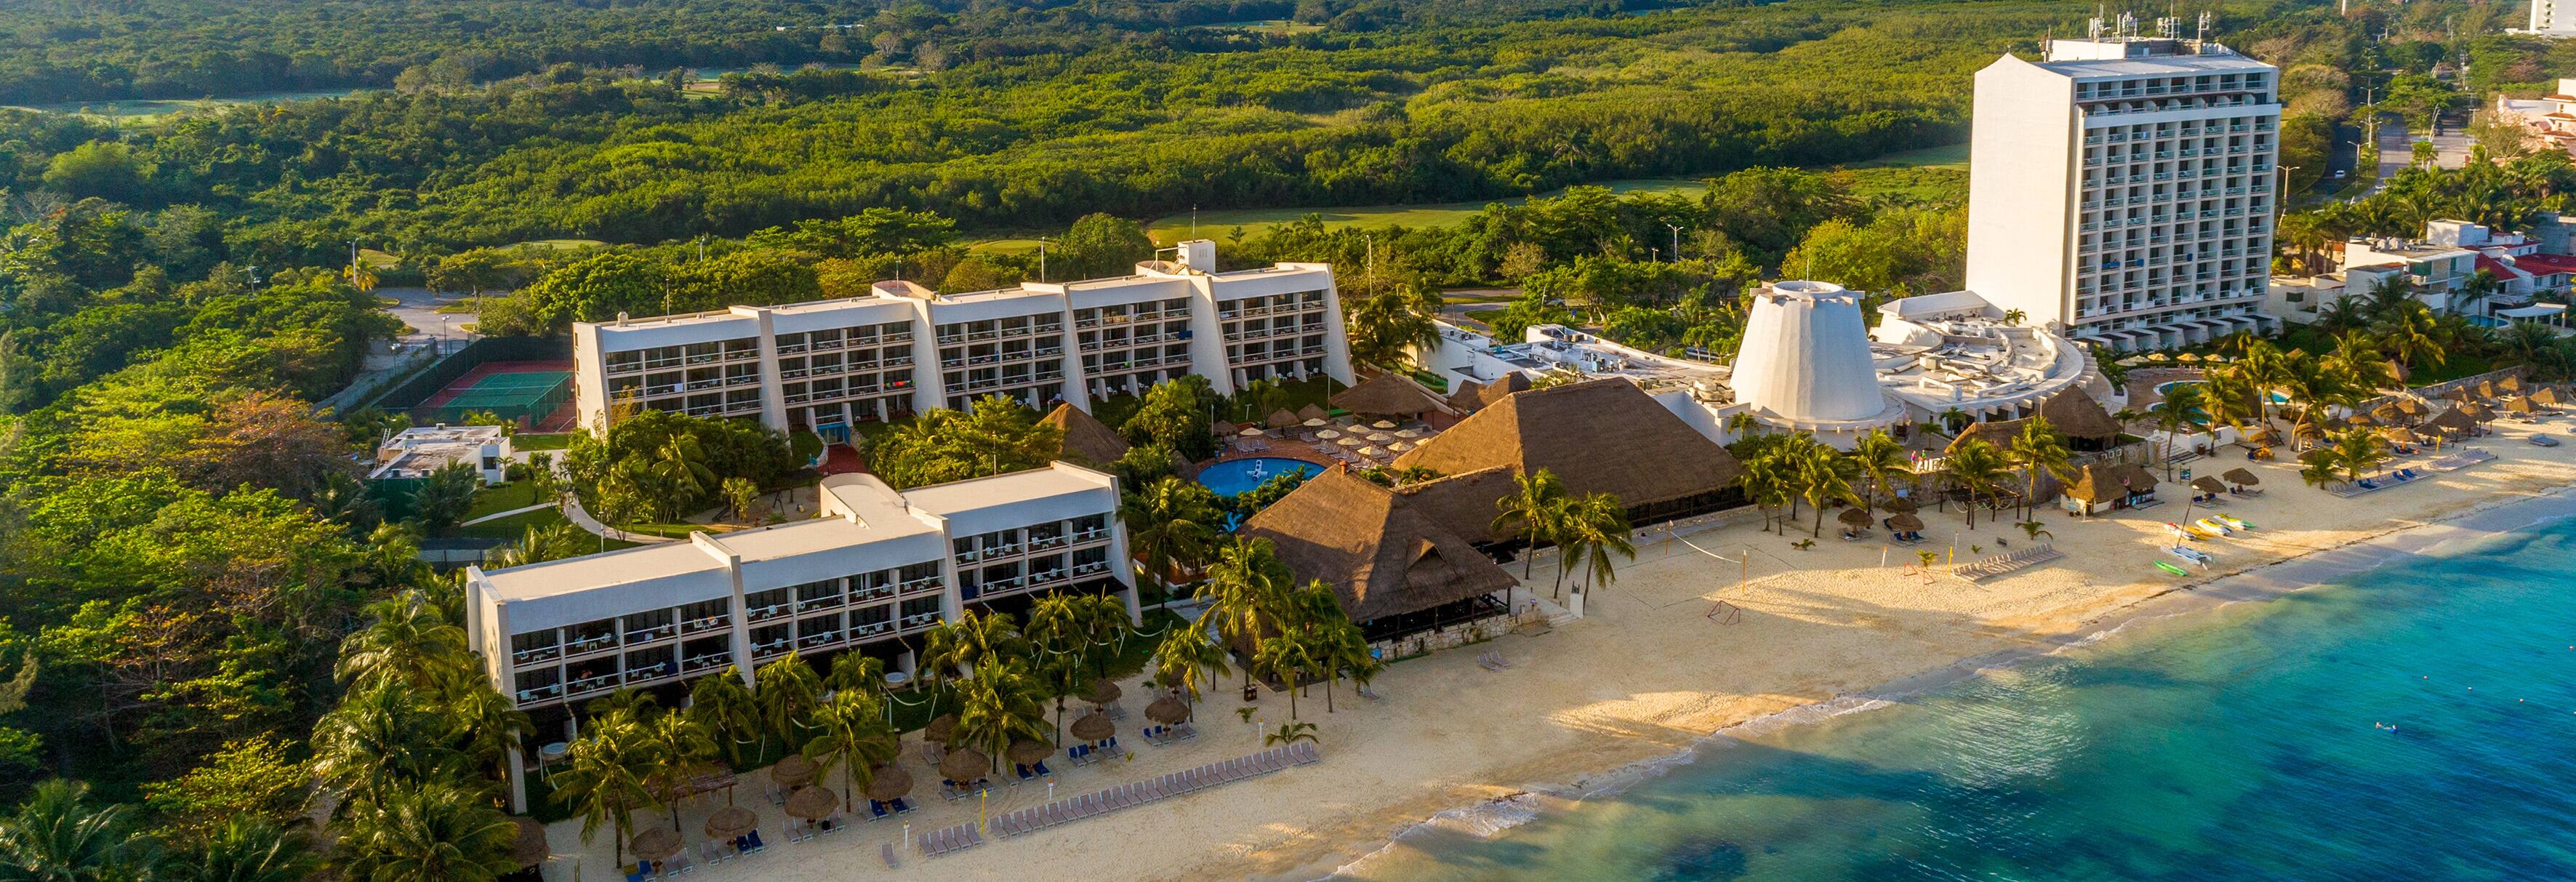 Hotel Meliá Cozumel Golf All Inclusive resort in Mexico 